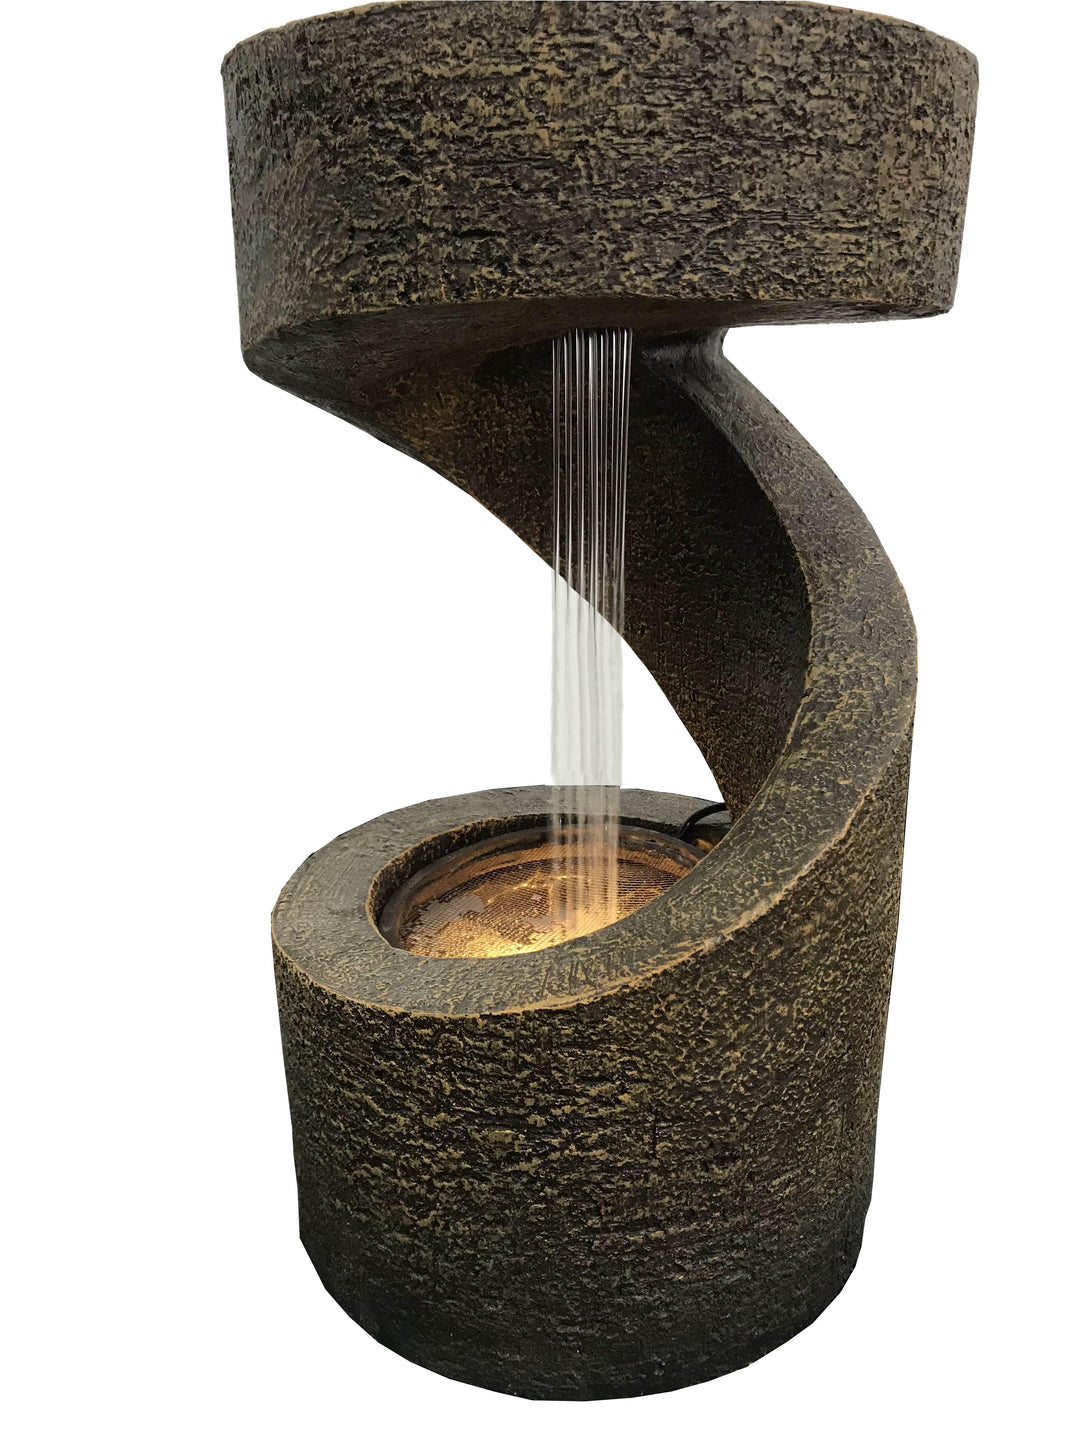 Wooden LED fountain - Water resistant HI-LINE GIFT LTD.